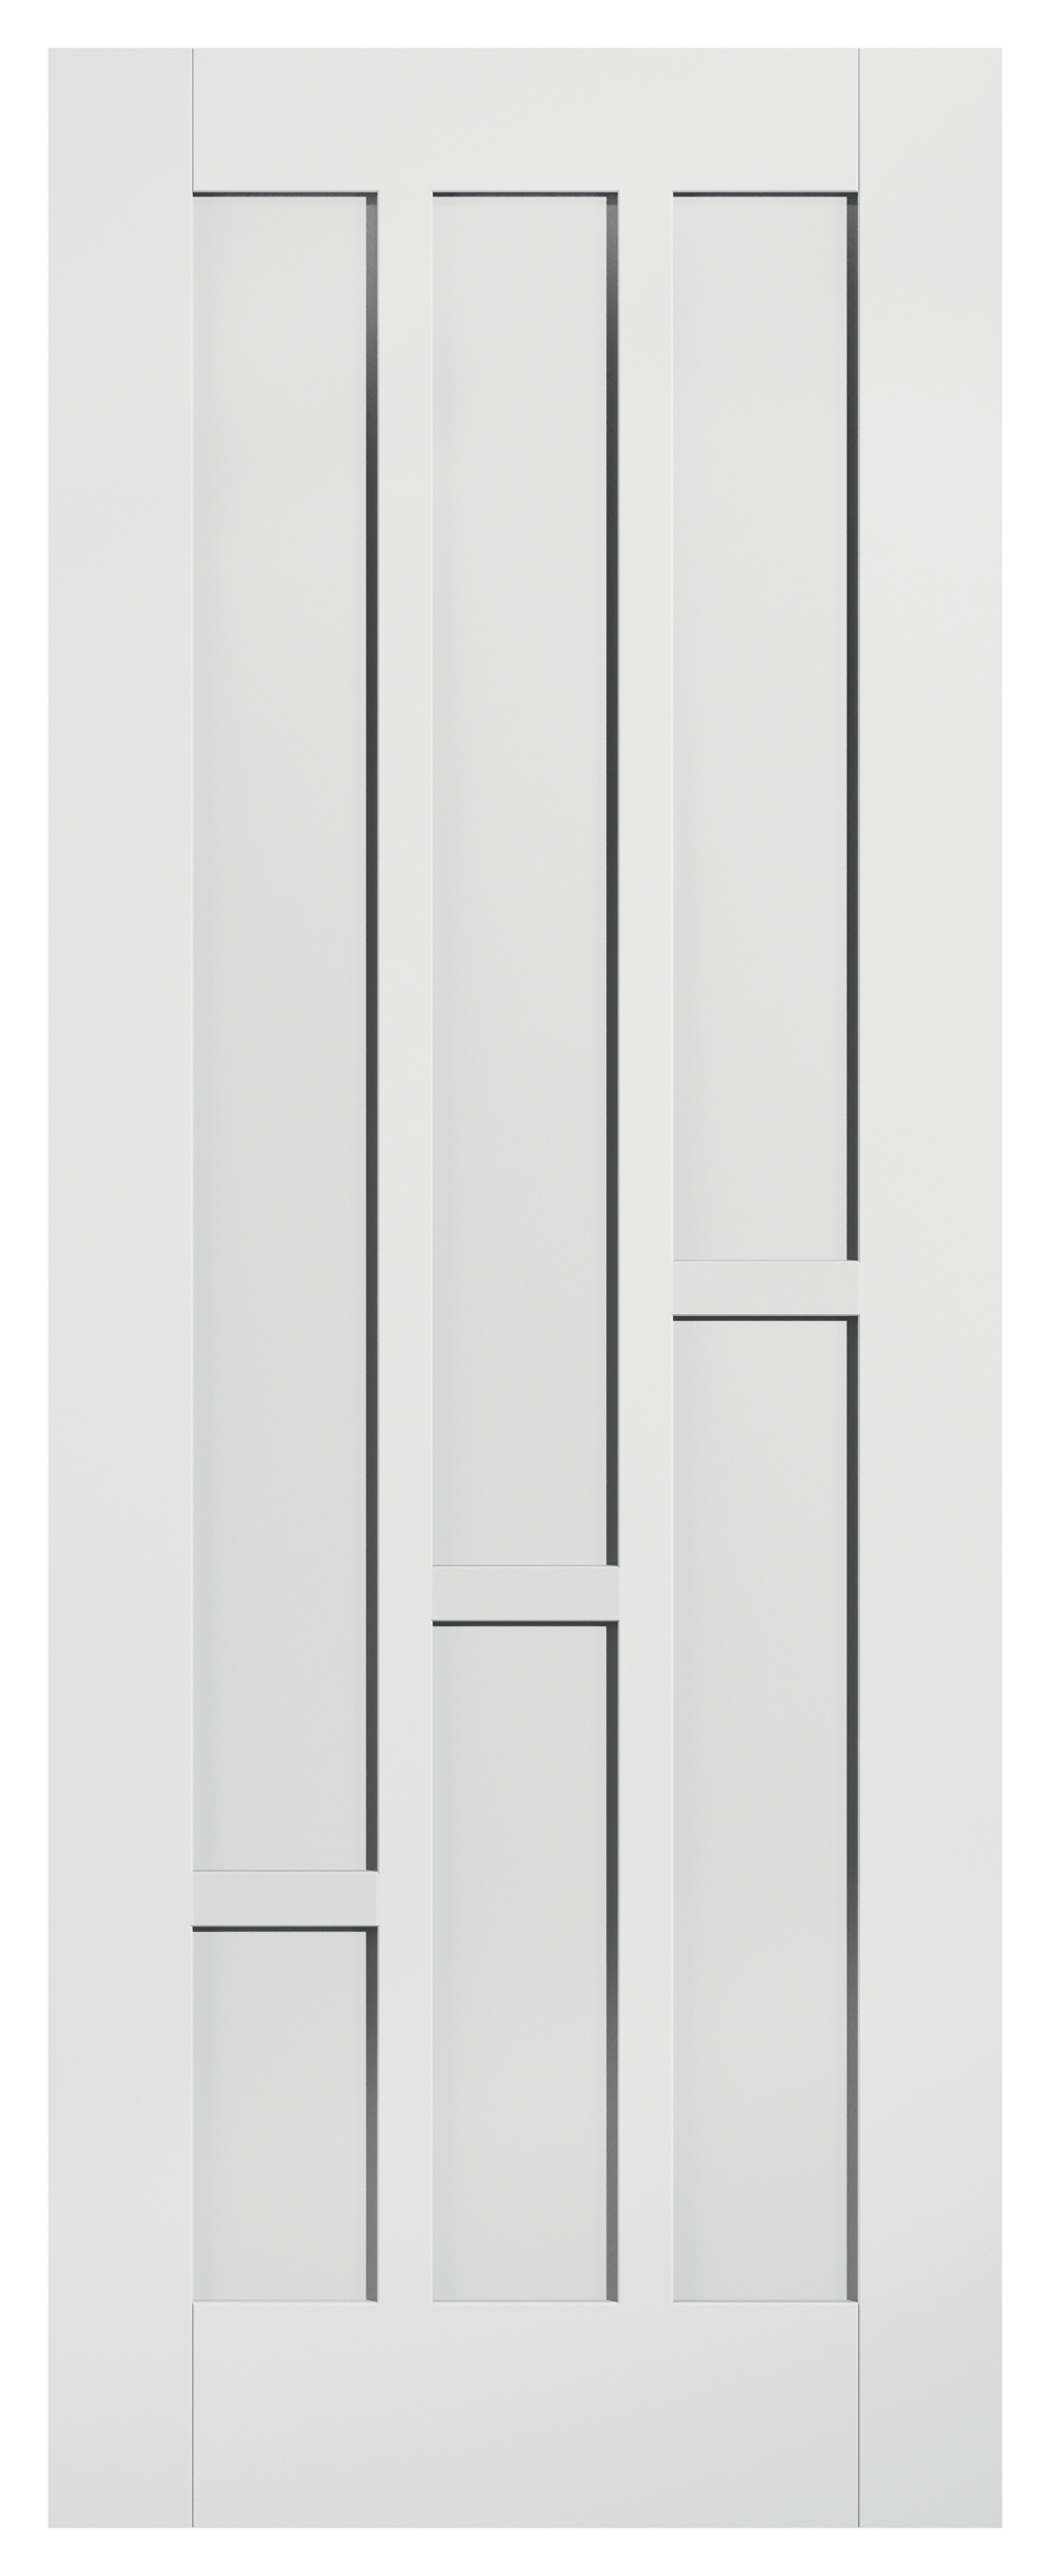 Image of LPD Internal Coventry 6 Panel Primed White FD30 Fire Door - 762 x 1981mm